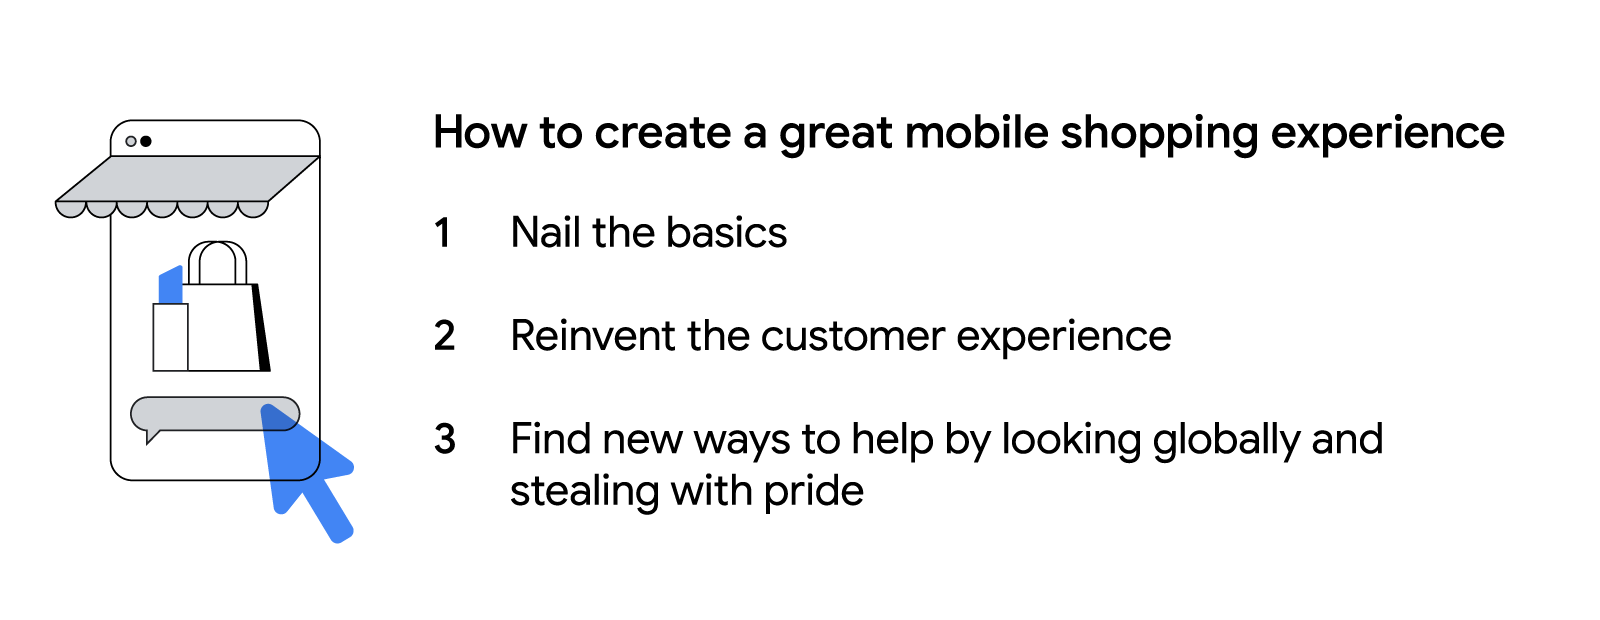 To create a great mobile experience: Nail the basics by walking in your customers' shoes; reinvent the customer experience; and find new ways to help by looking globally and stealing with pride.